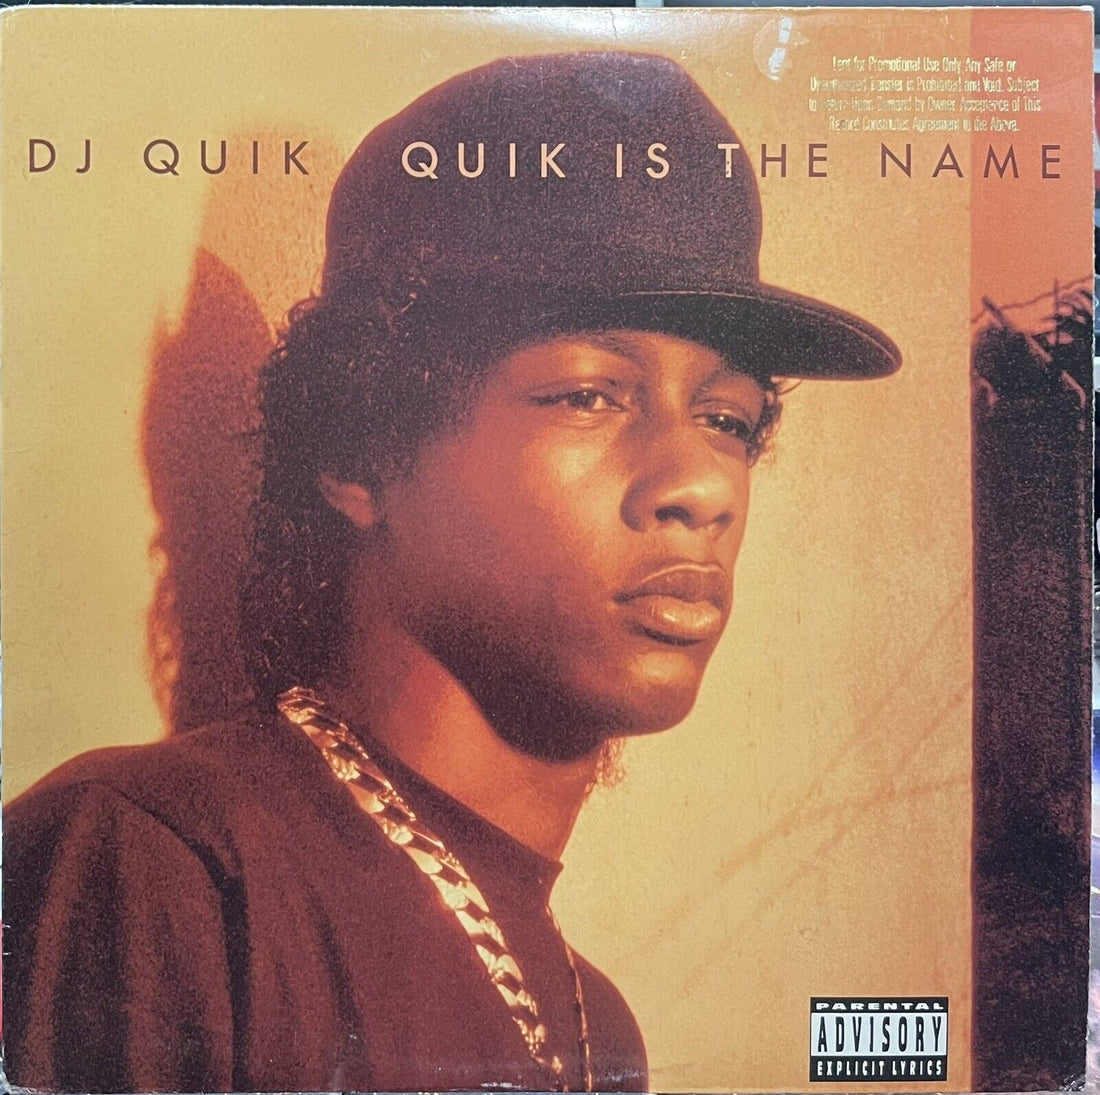 On This Day in 1991 Dj Quick Releaed Quik Is The Name